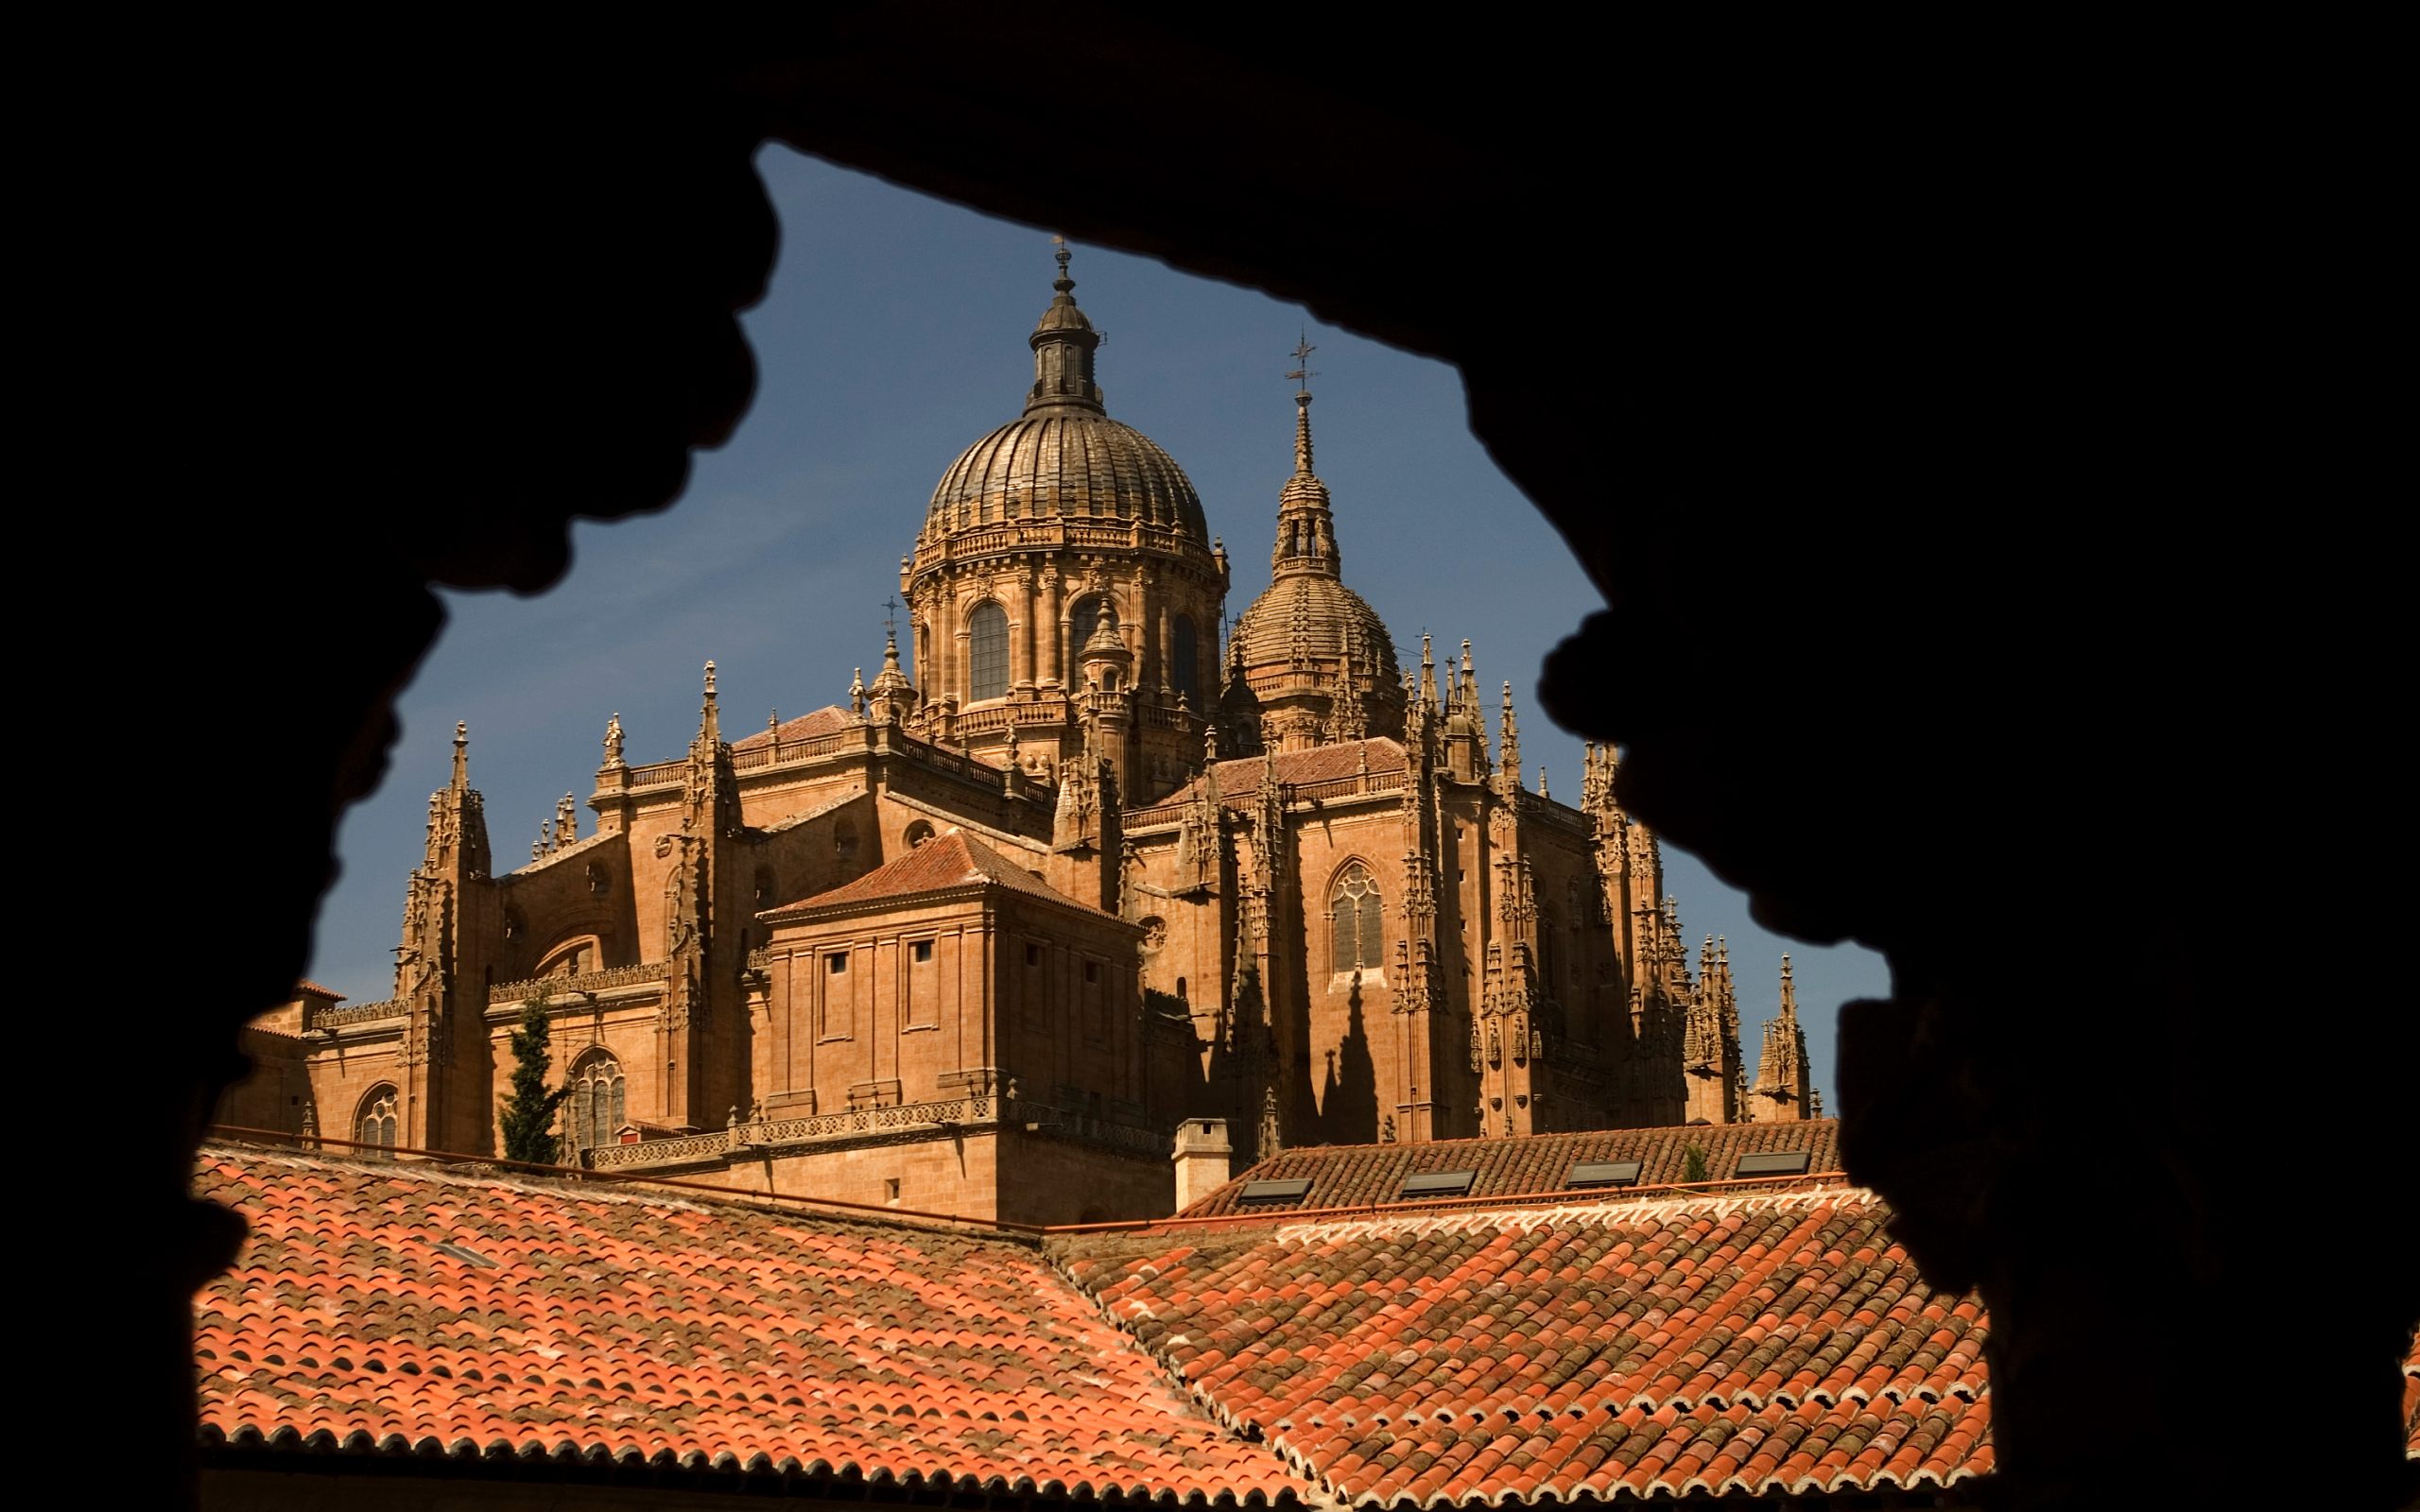 Salamanca's stunning cathedral is a religious icon, radiating architectural beauty.